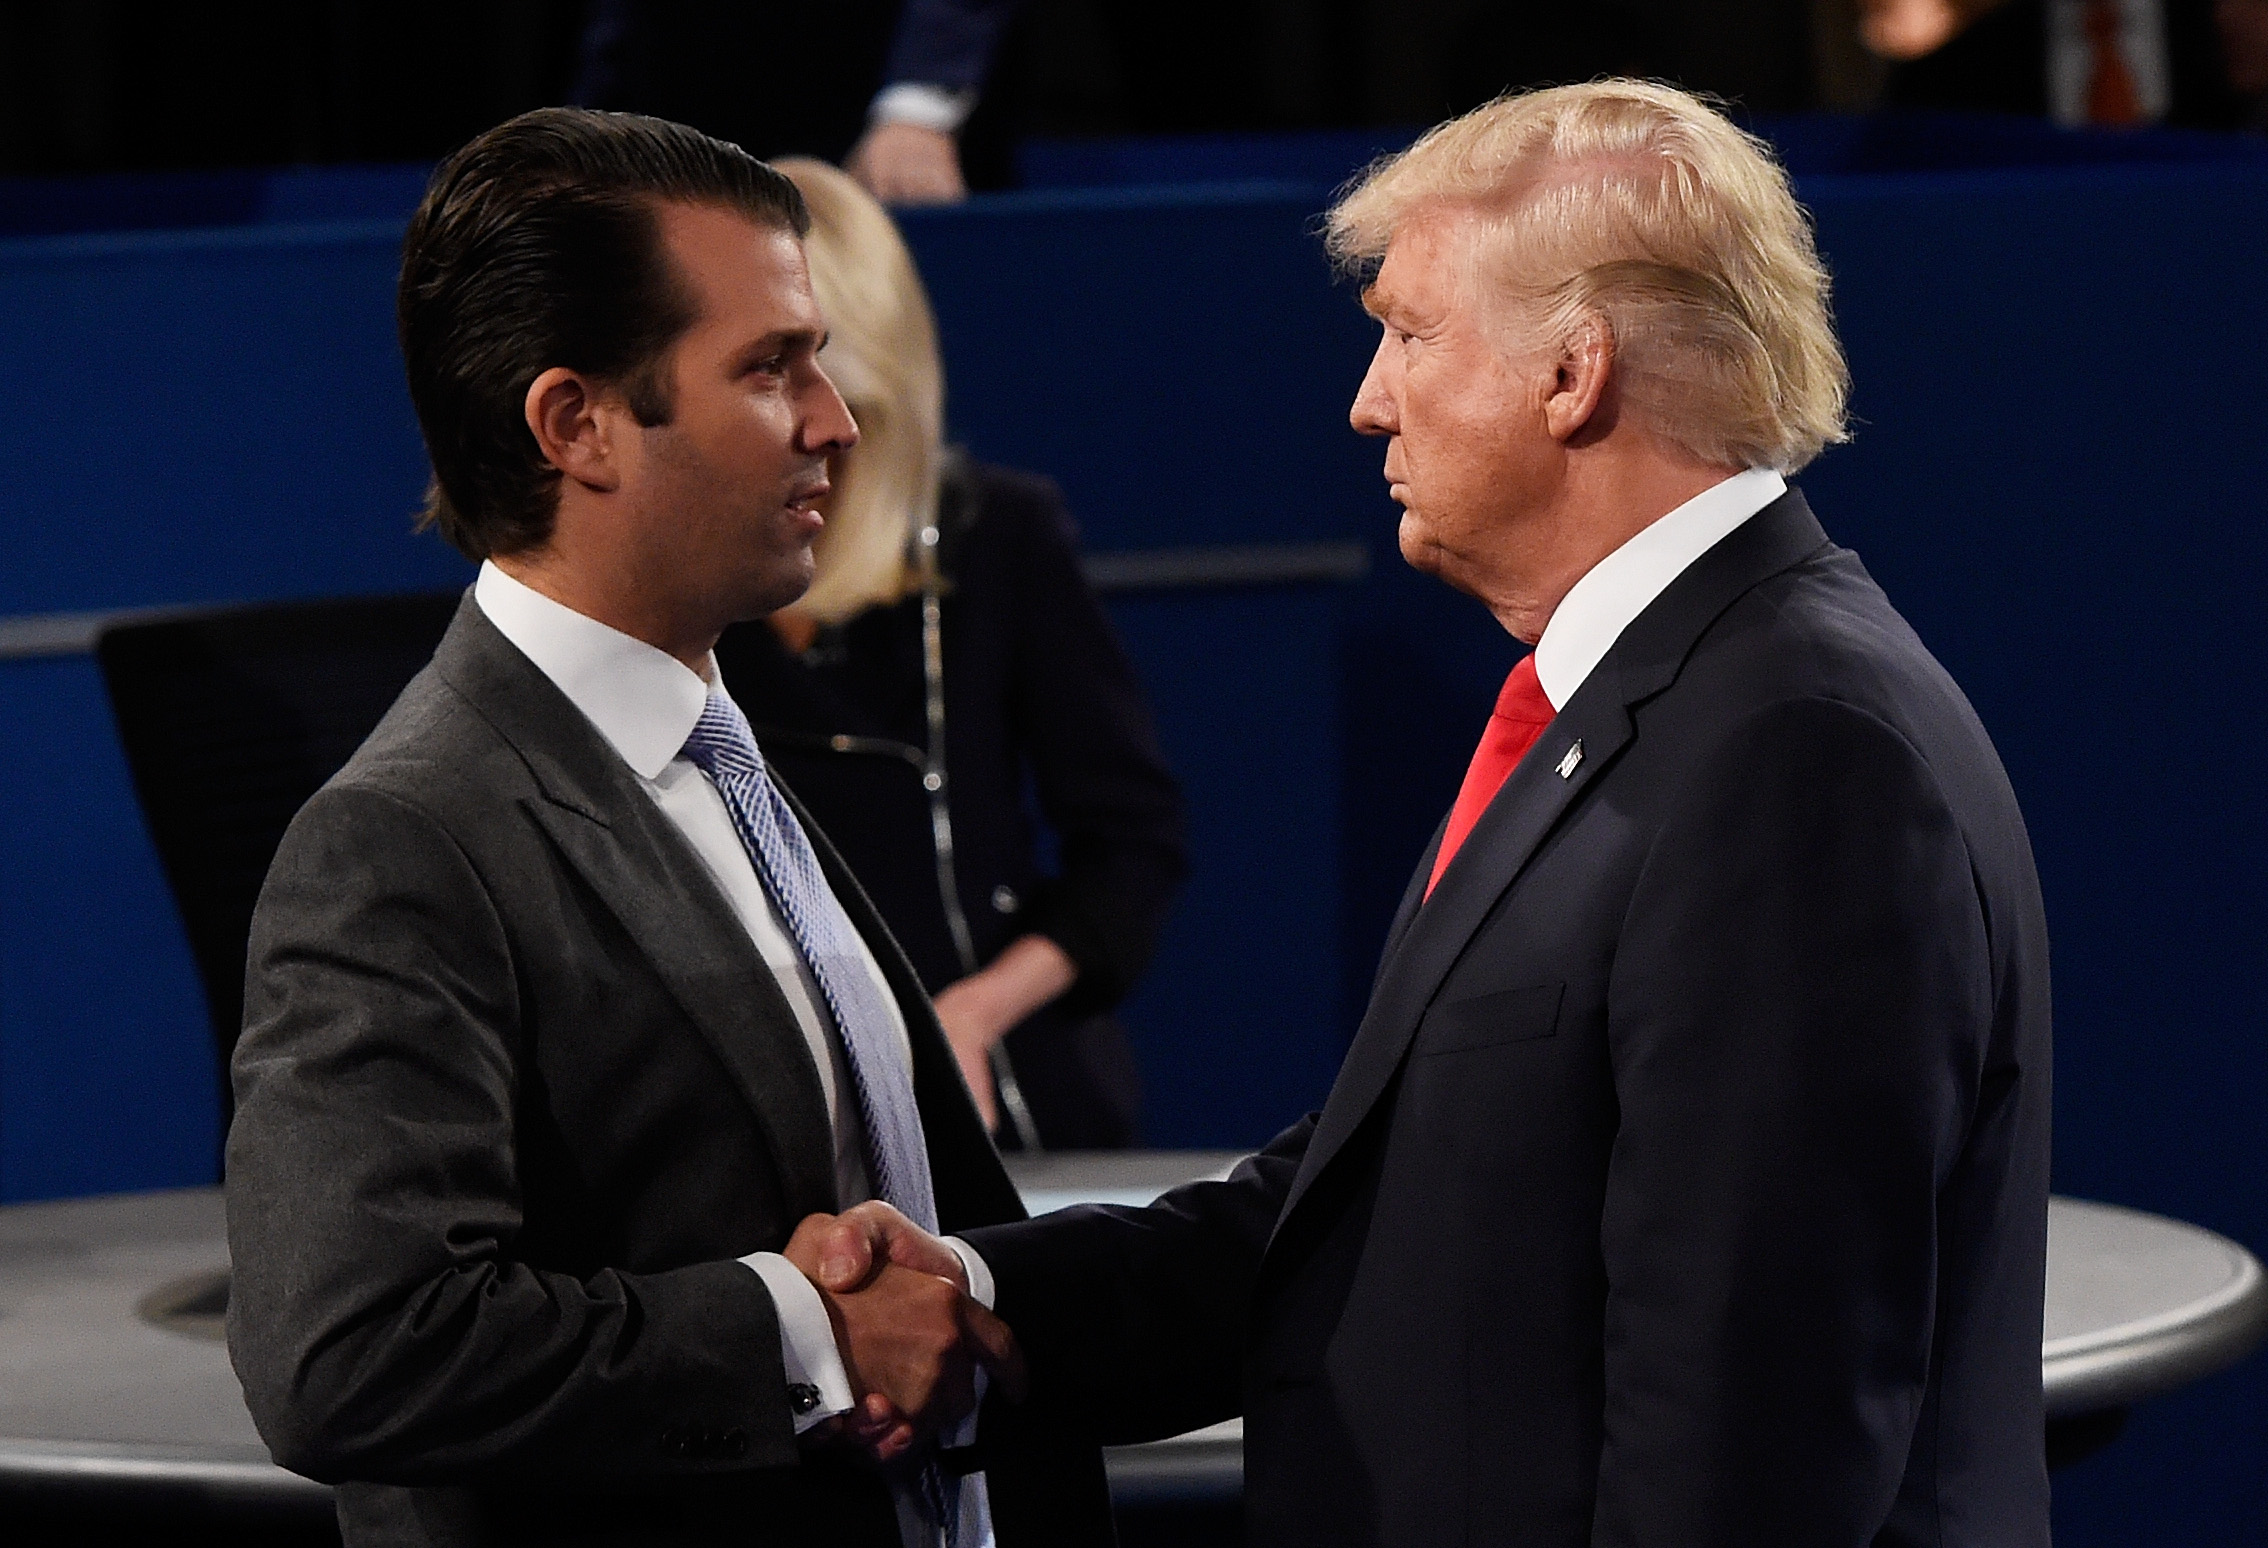 Donald Trump Jr. Will Run For President in 2024 and He'll Likely Win